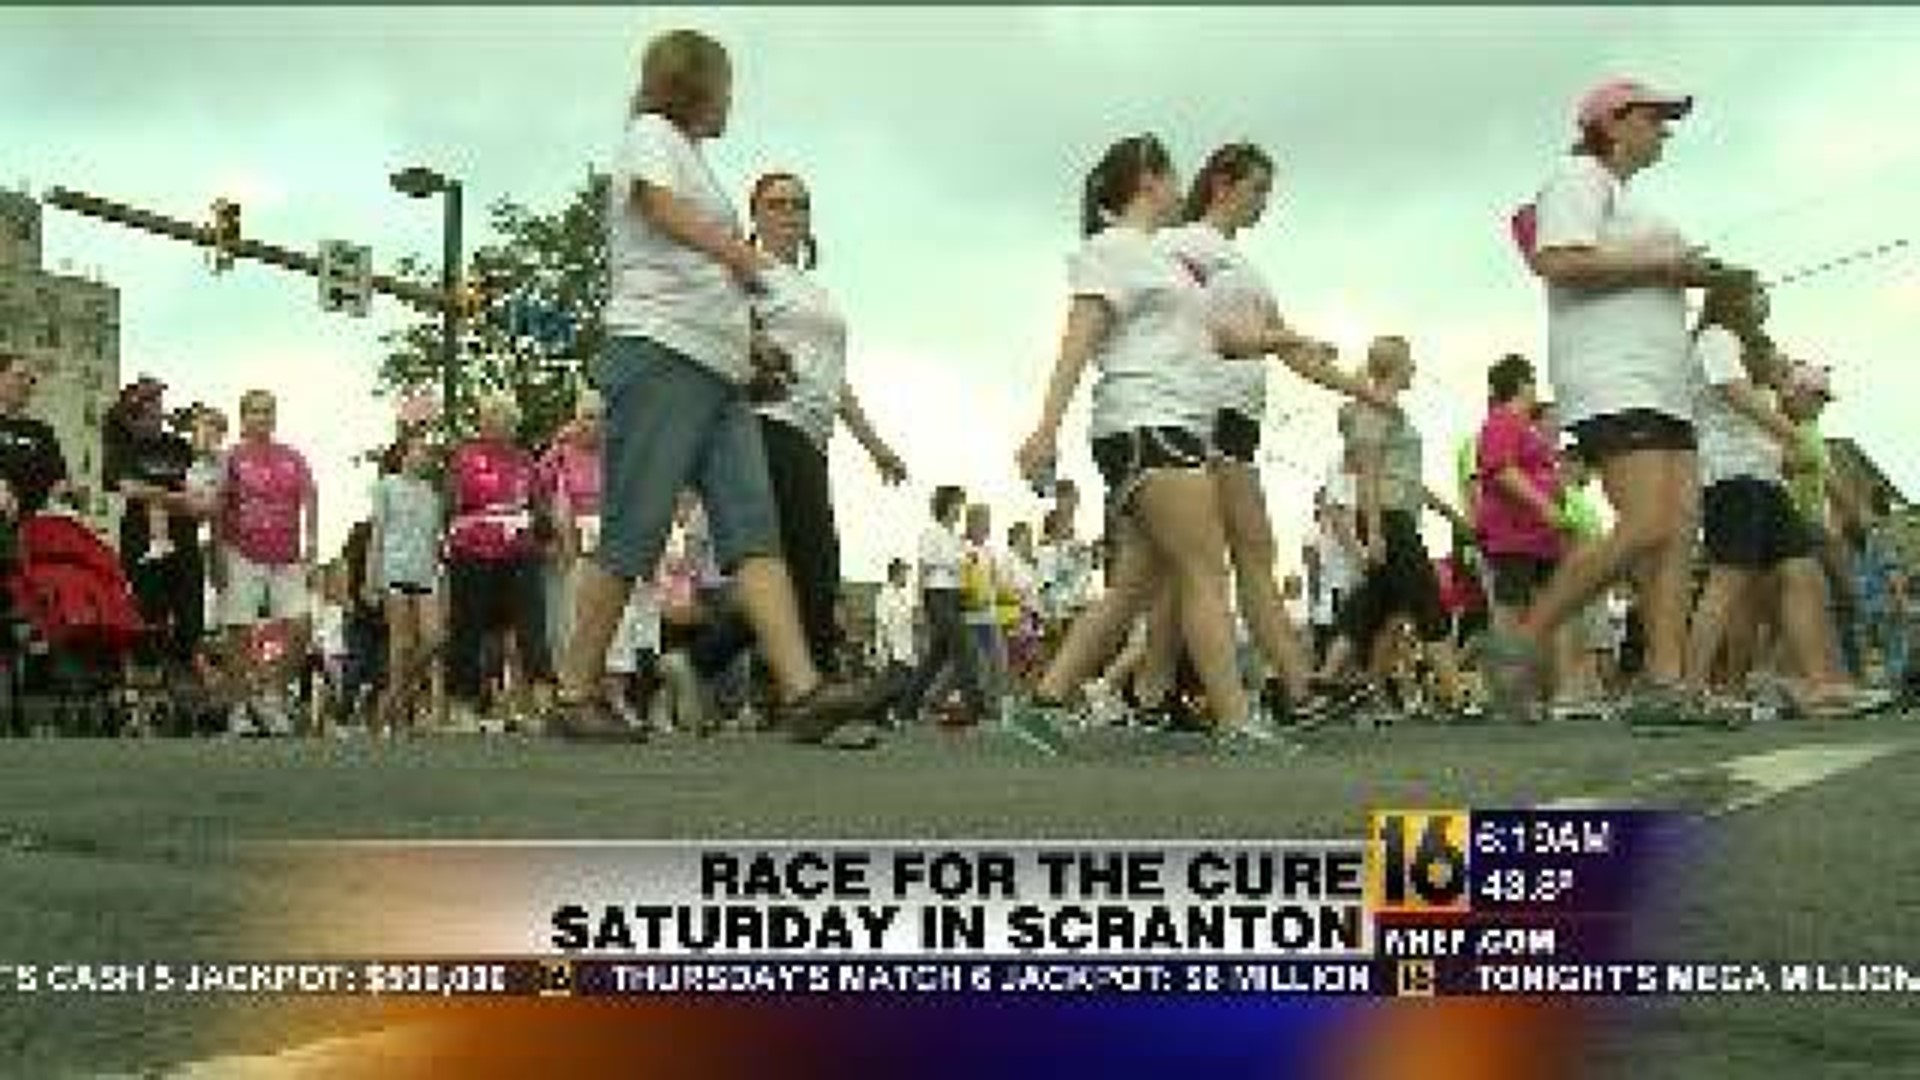 23rd Annual Race for the Cure